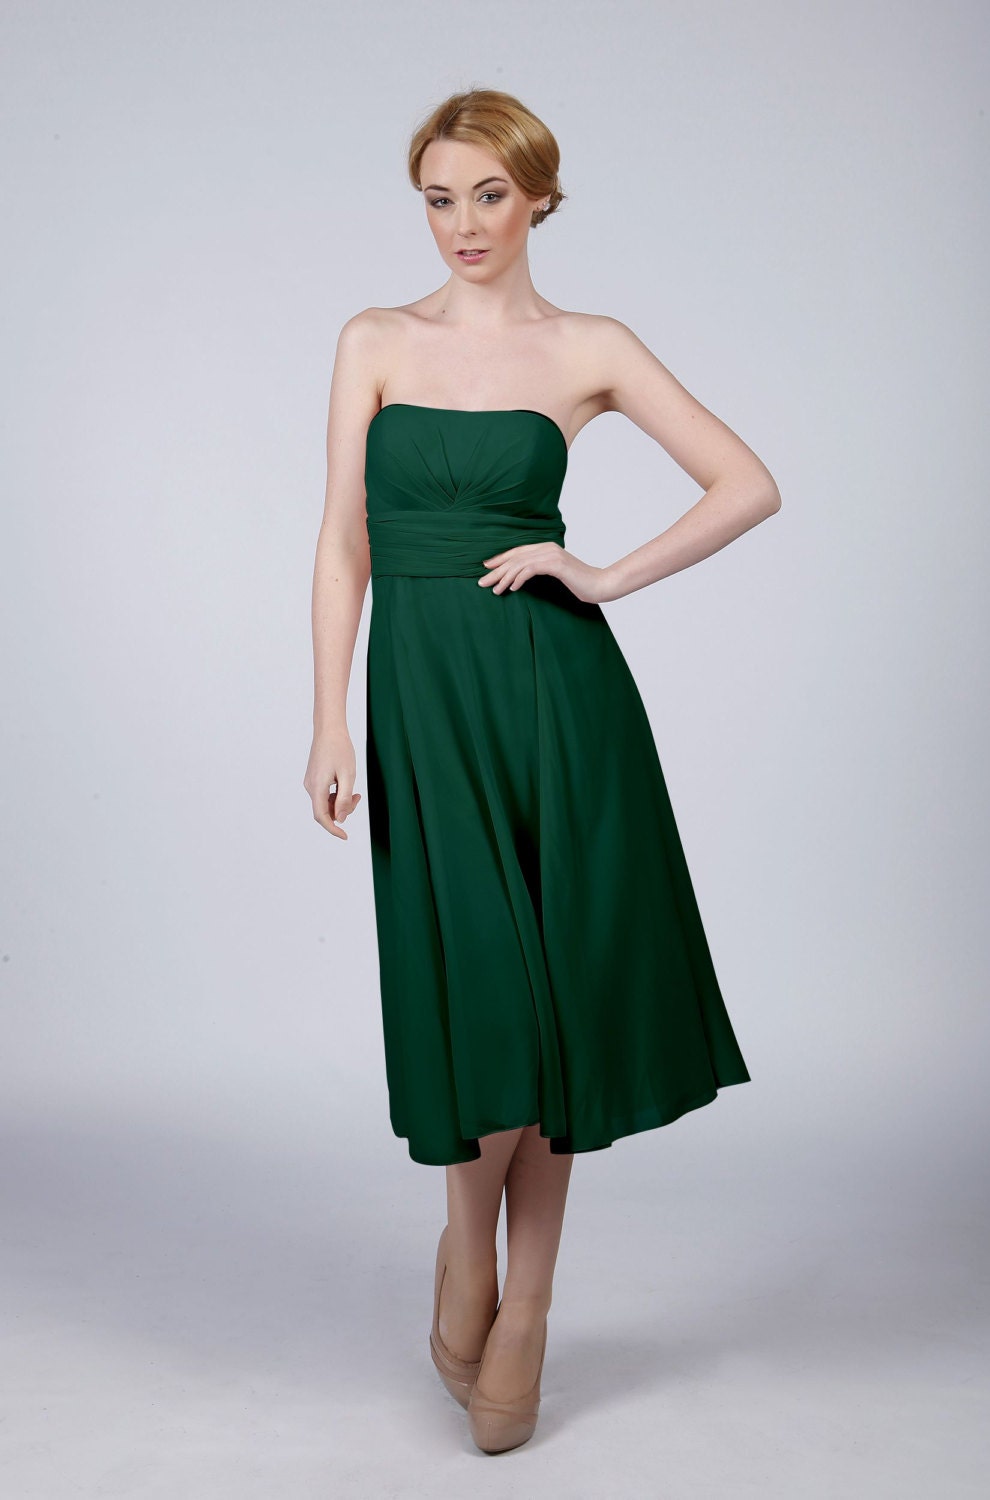  Forest  Green  Strapless Short Bridesmaid  Prom  Dress  by